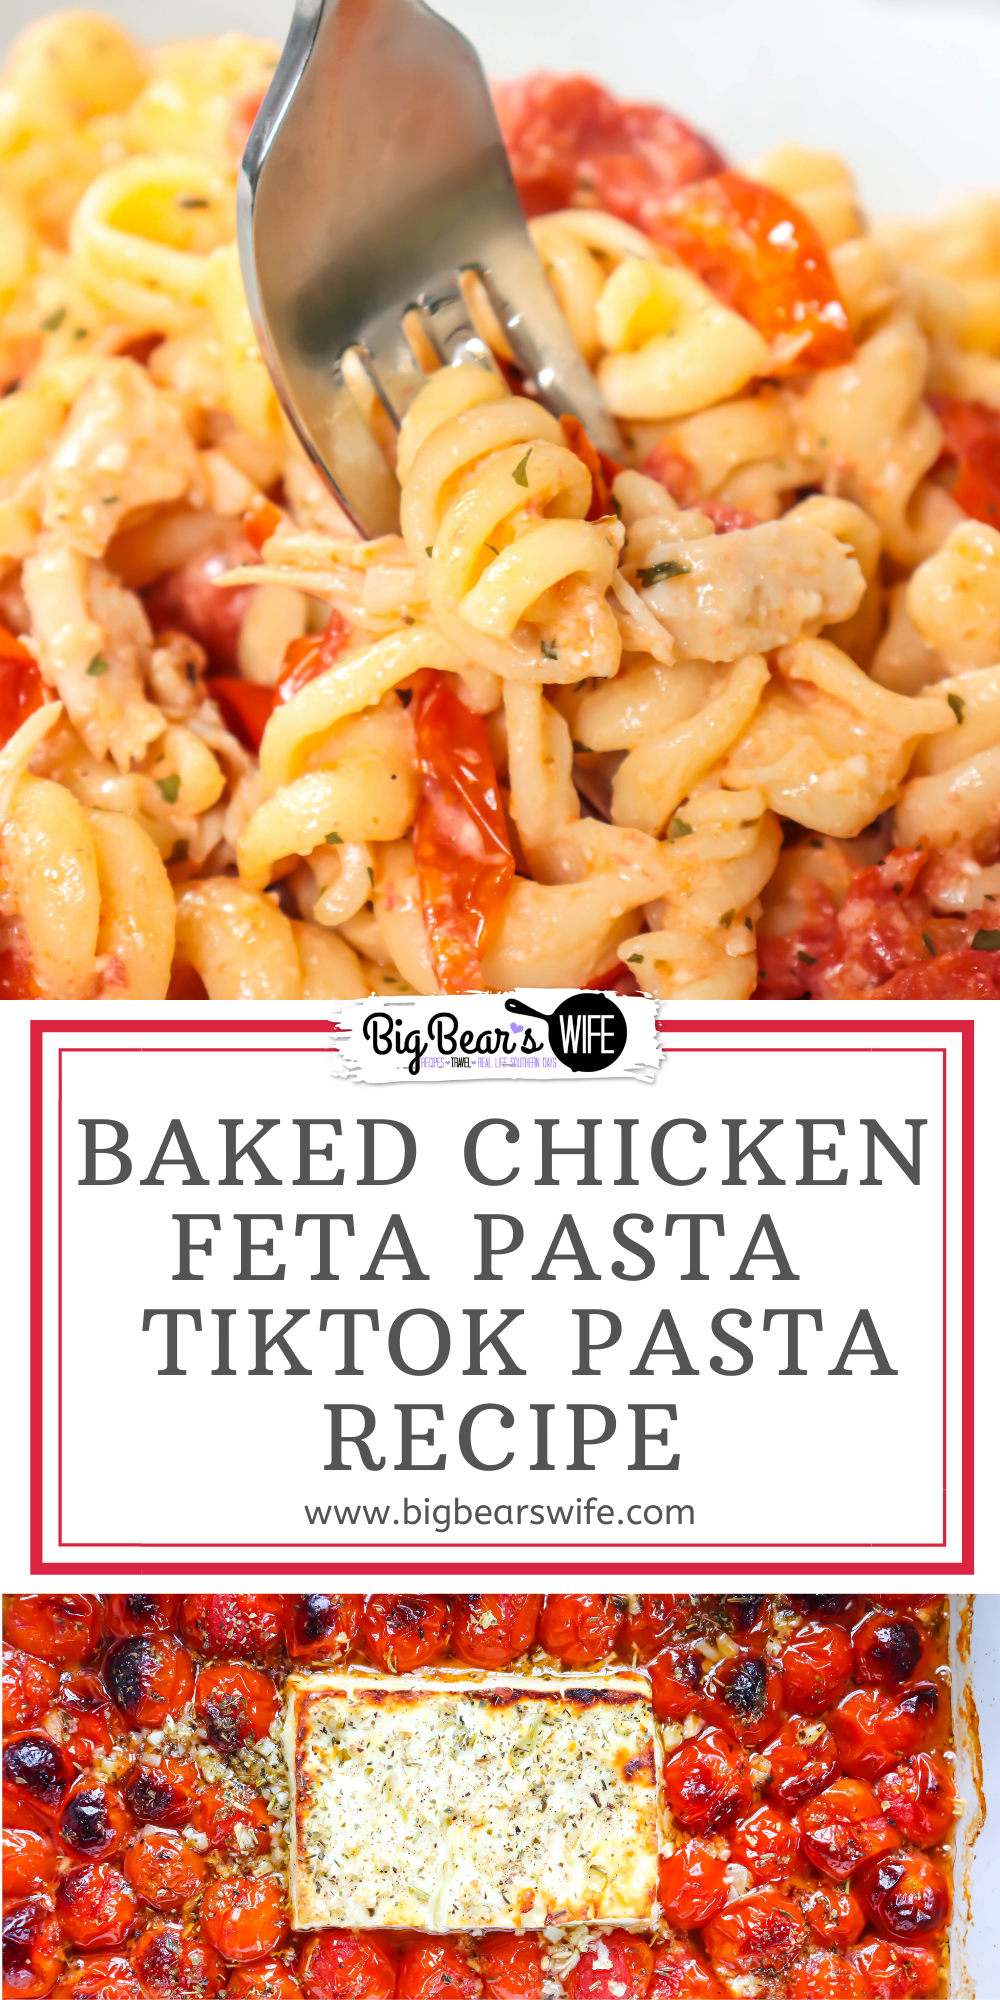 A little chicken twist on the TikTok famous Chicken Feta Pasta is what we're servings up today! This  Baked Chicken Feta Pasta is delicious and hardly takes any work in the kitchen to toss together!  via @bigbearswife